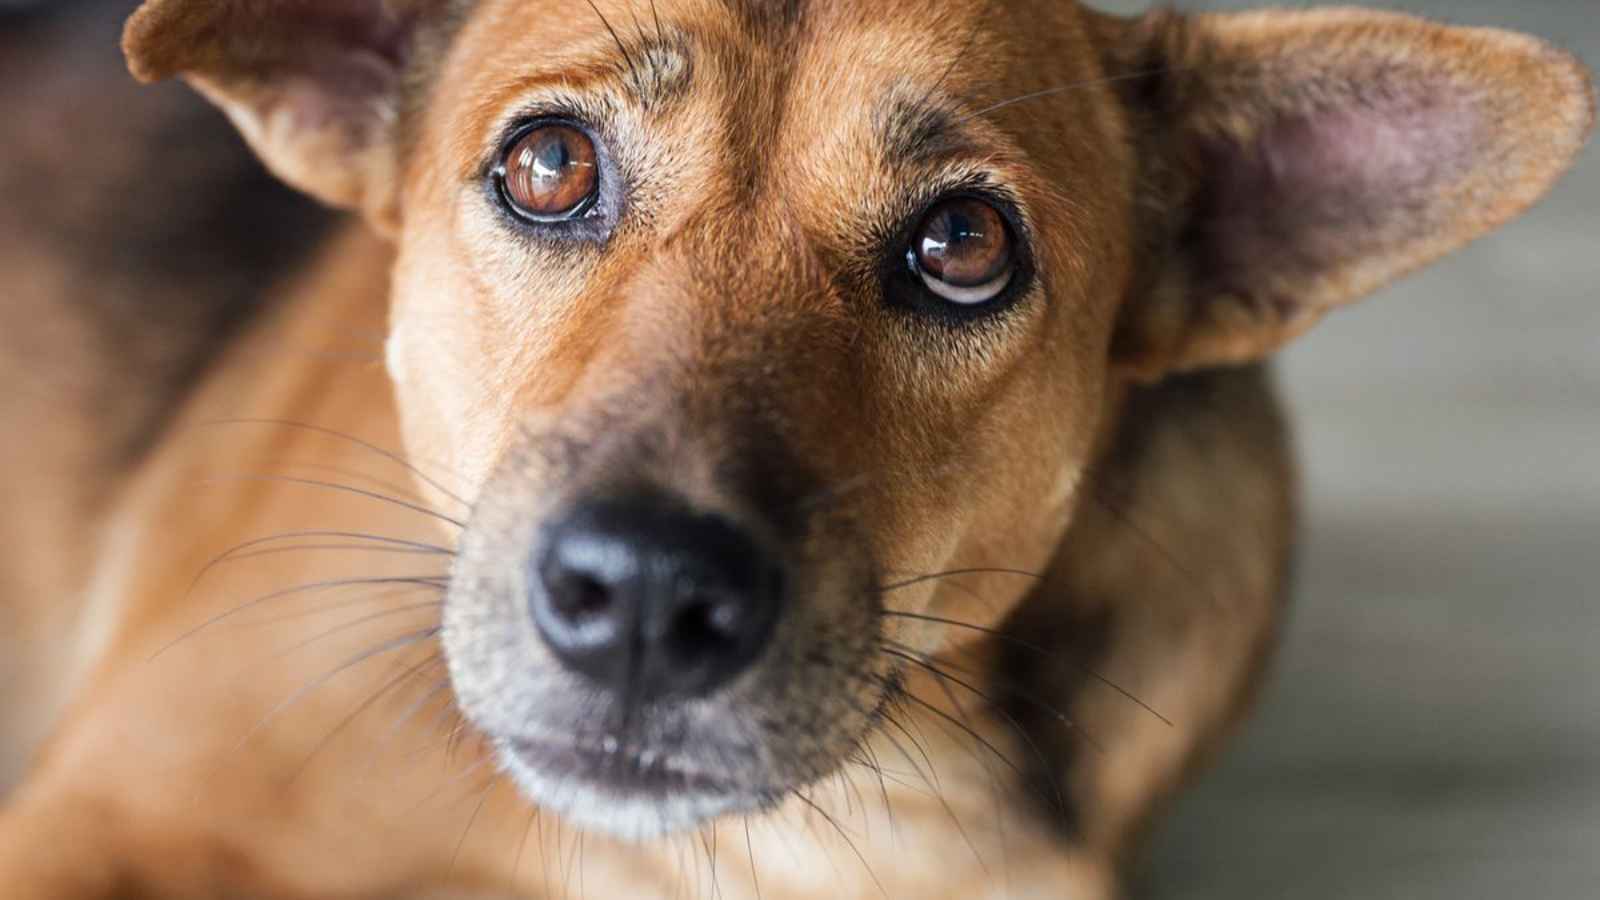 National Rescue Dog Day 2023: Date, History, Facts about Animal Cruelty